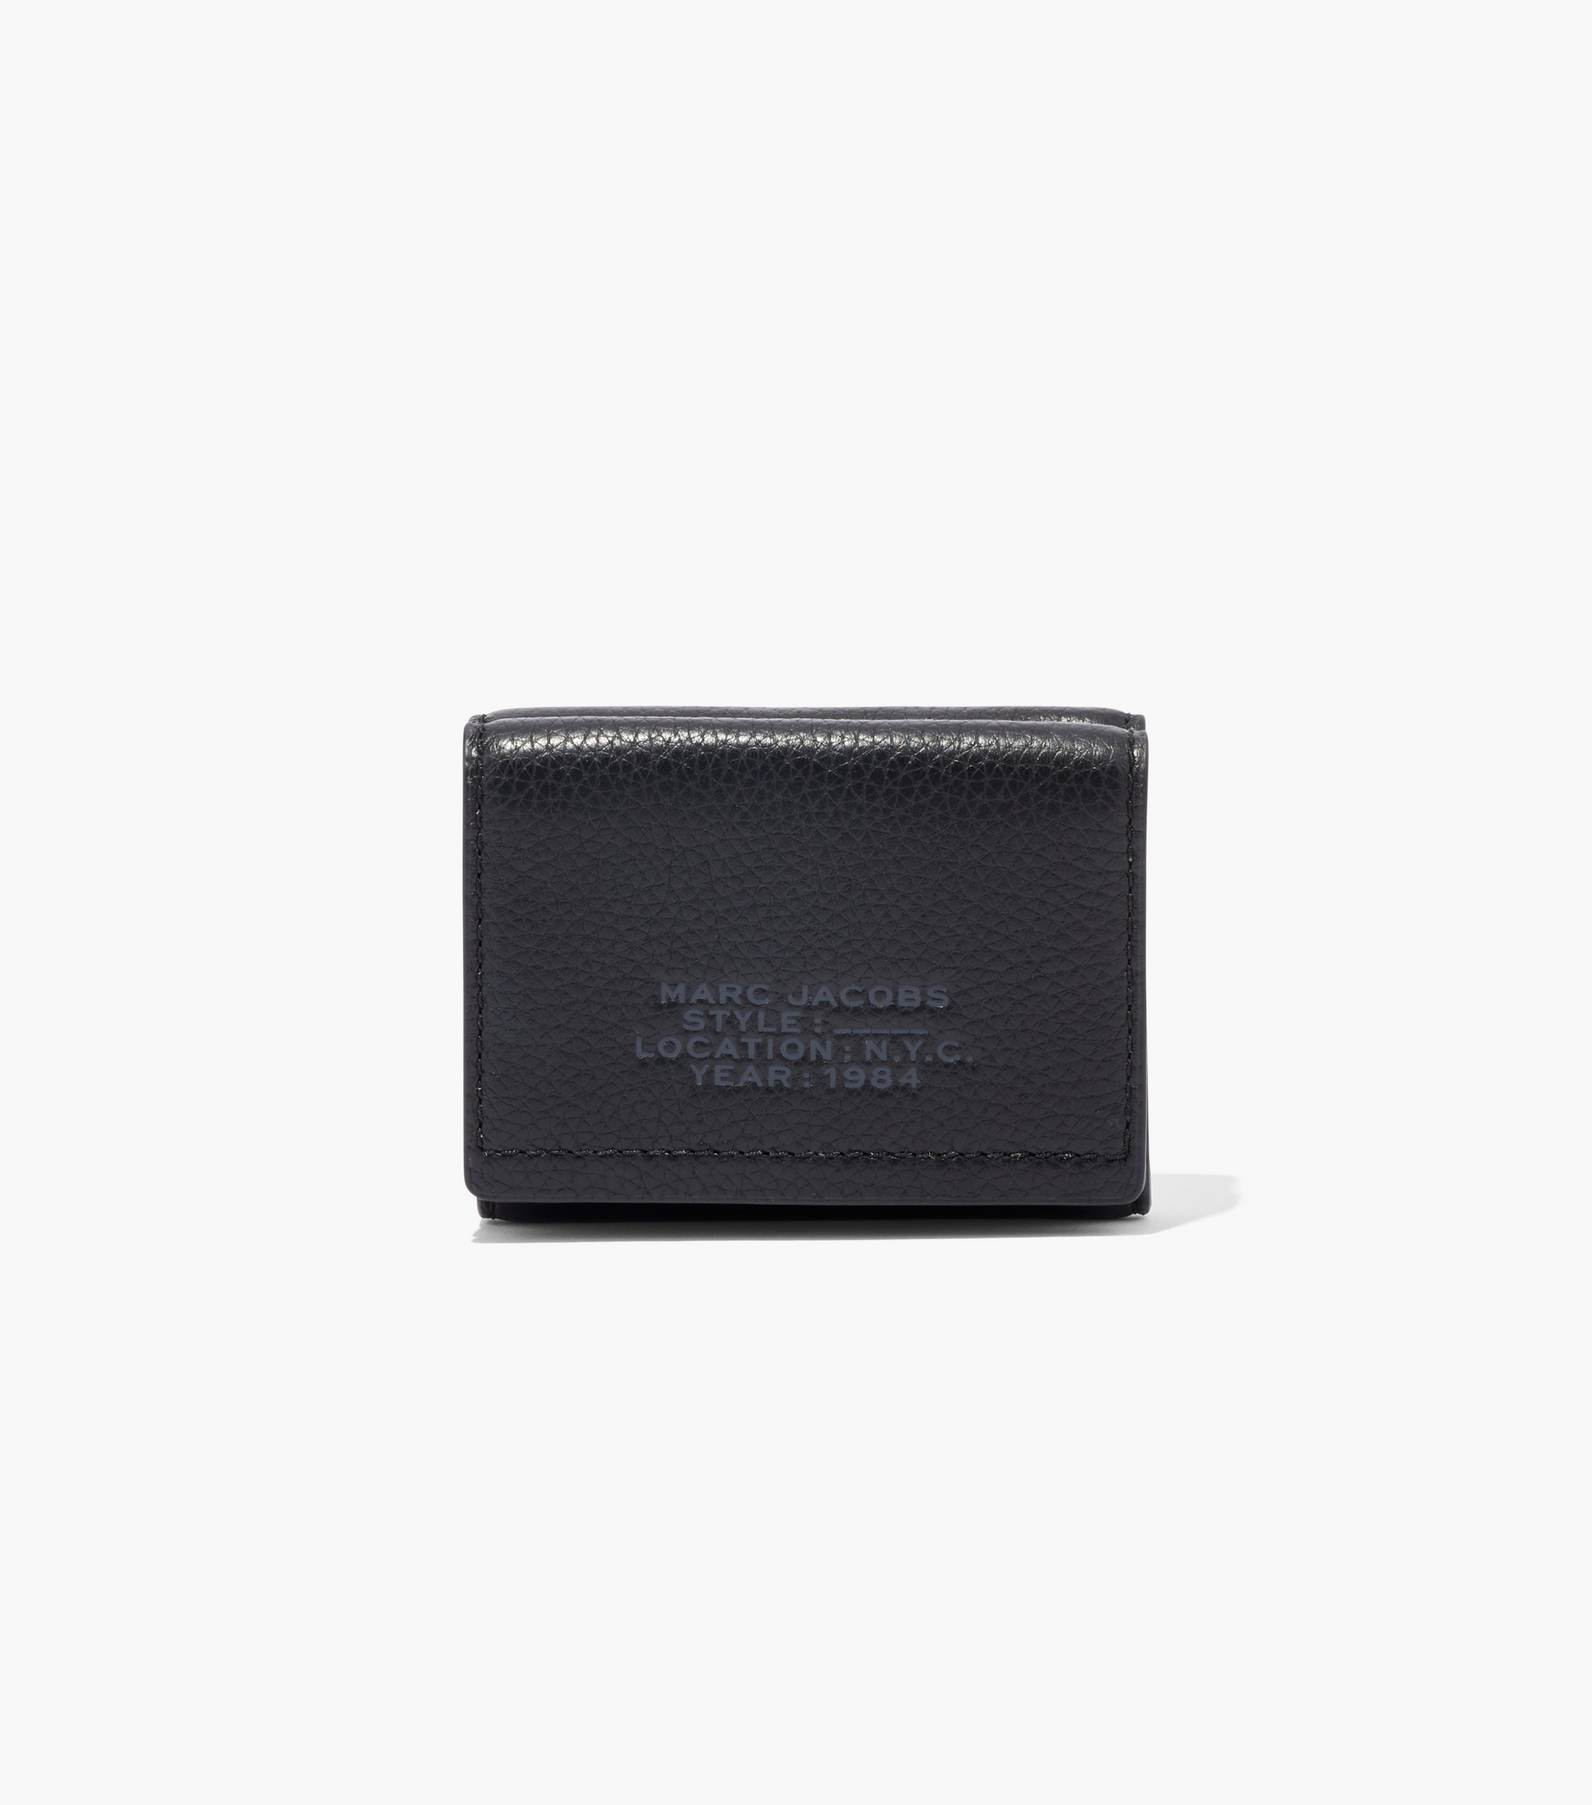 The Leather Medium Trifold Wallet